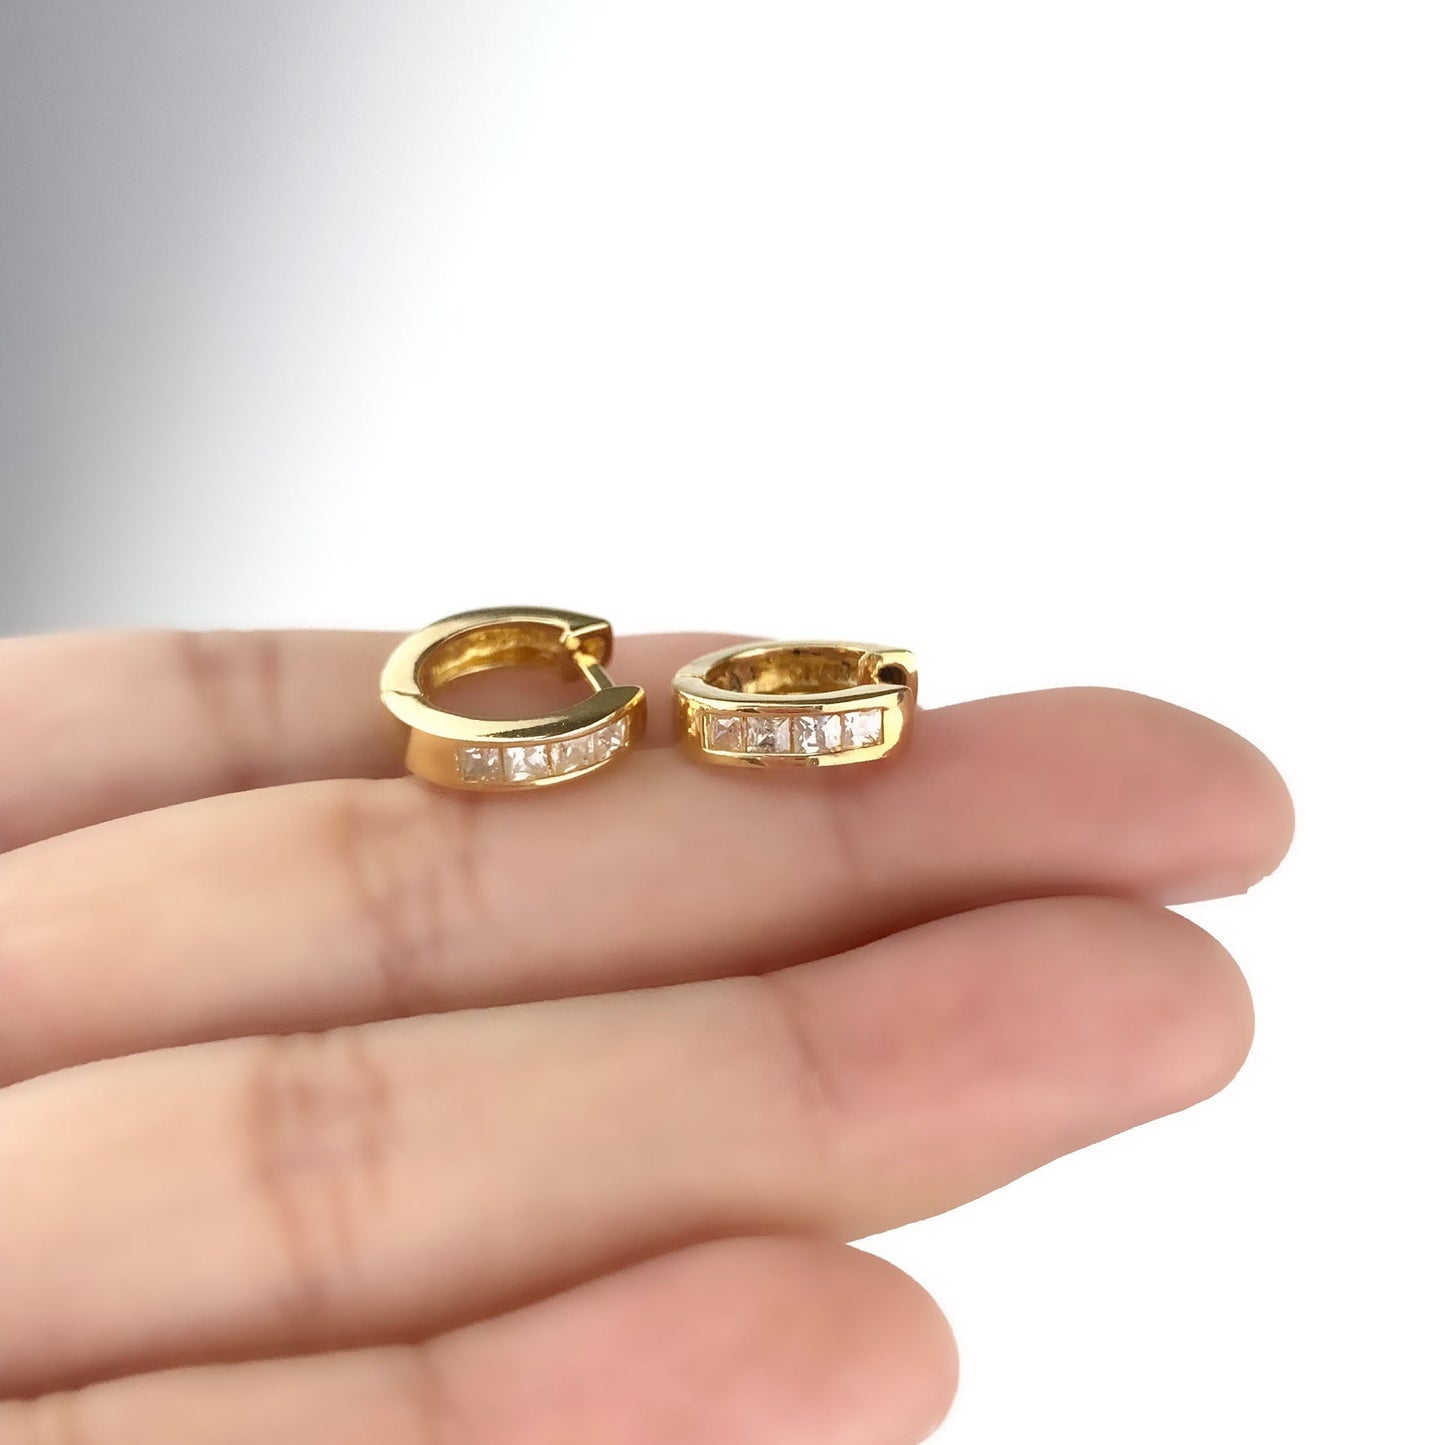 18k Gold Filled, Cubic Zirconia, Tiny Lever back Huggie Earrings, Wholesale Jewelry Supplies